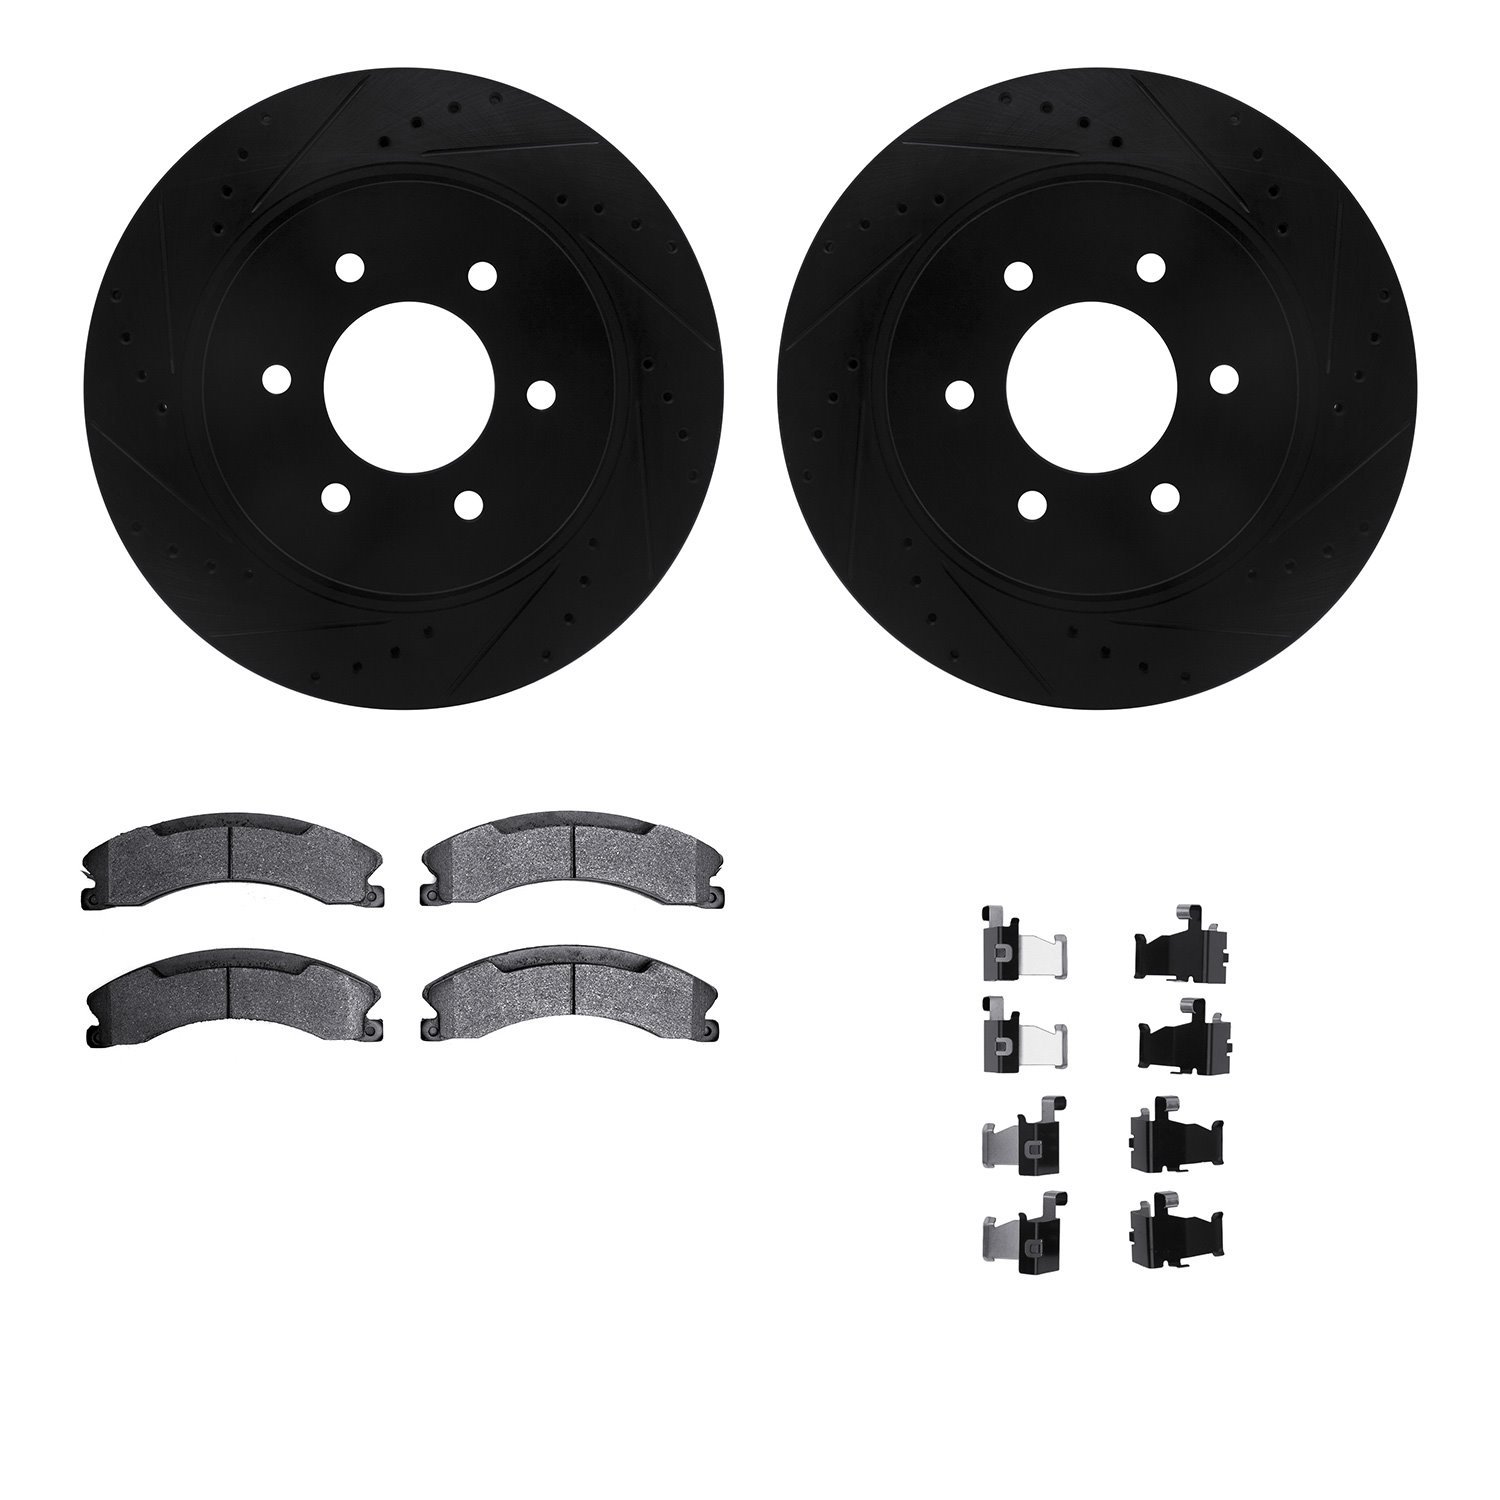 8412-67008 Drilled/Slotted Brake Rotors with Ultimate-Duty Brake Pads Kit & Hardware [Black], Fits Select Infiniti/Nissan, Posit